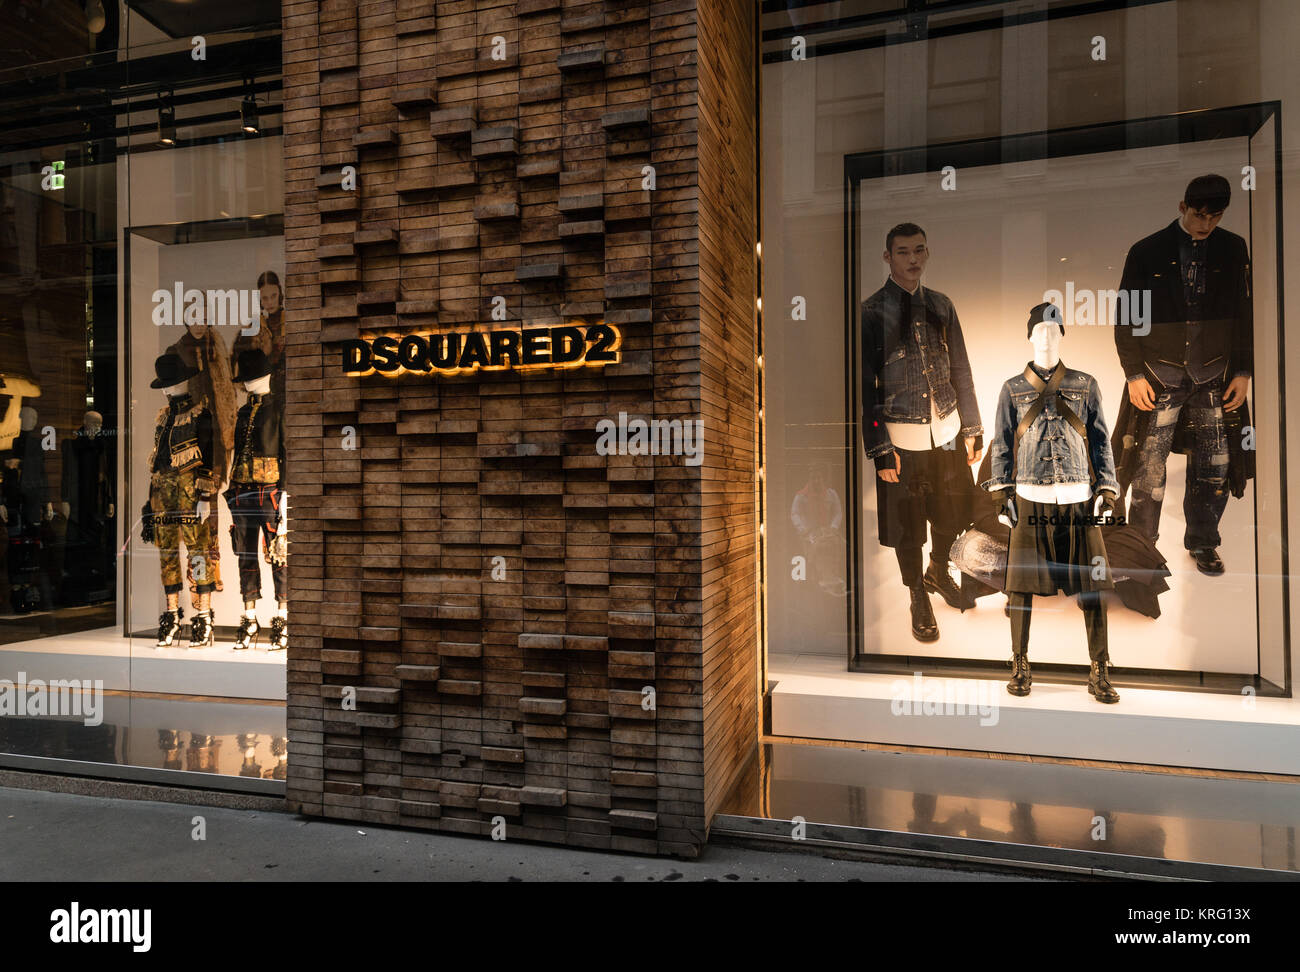 dsquared milano outlet